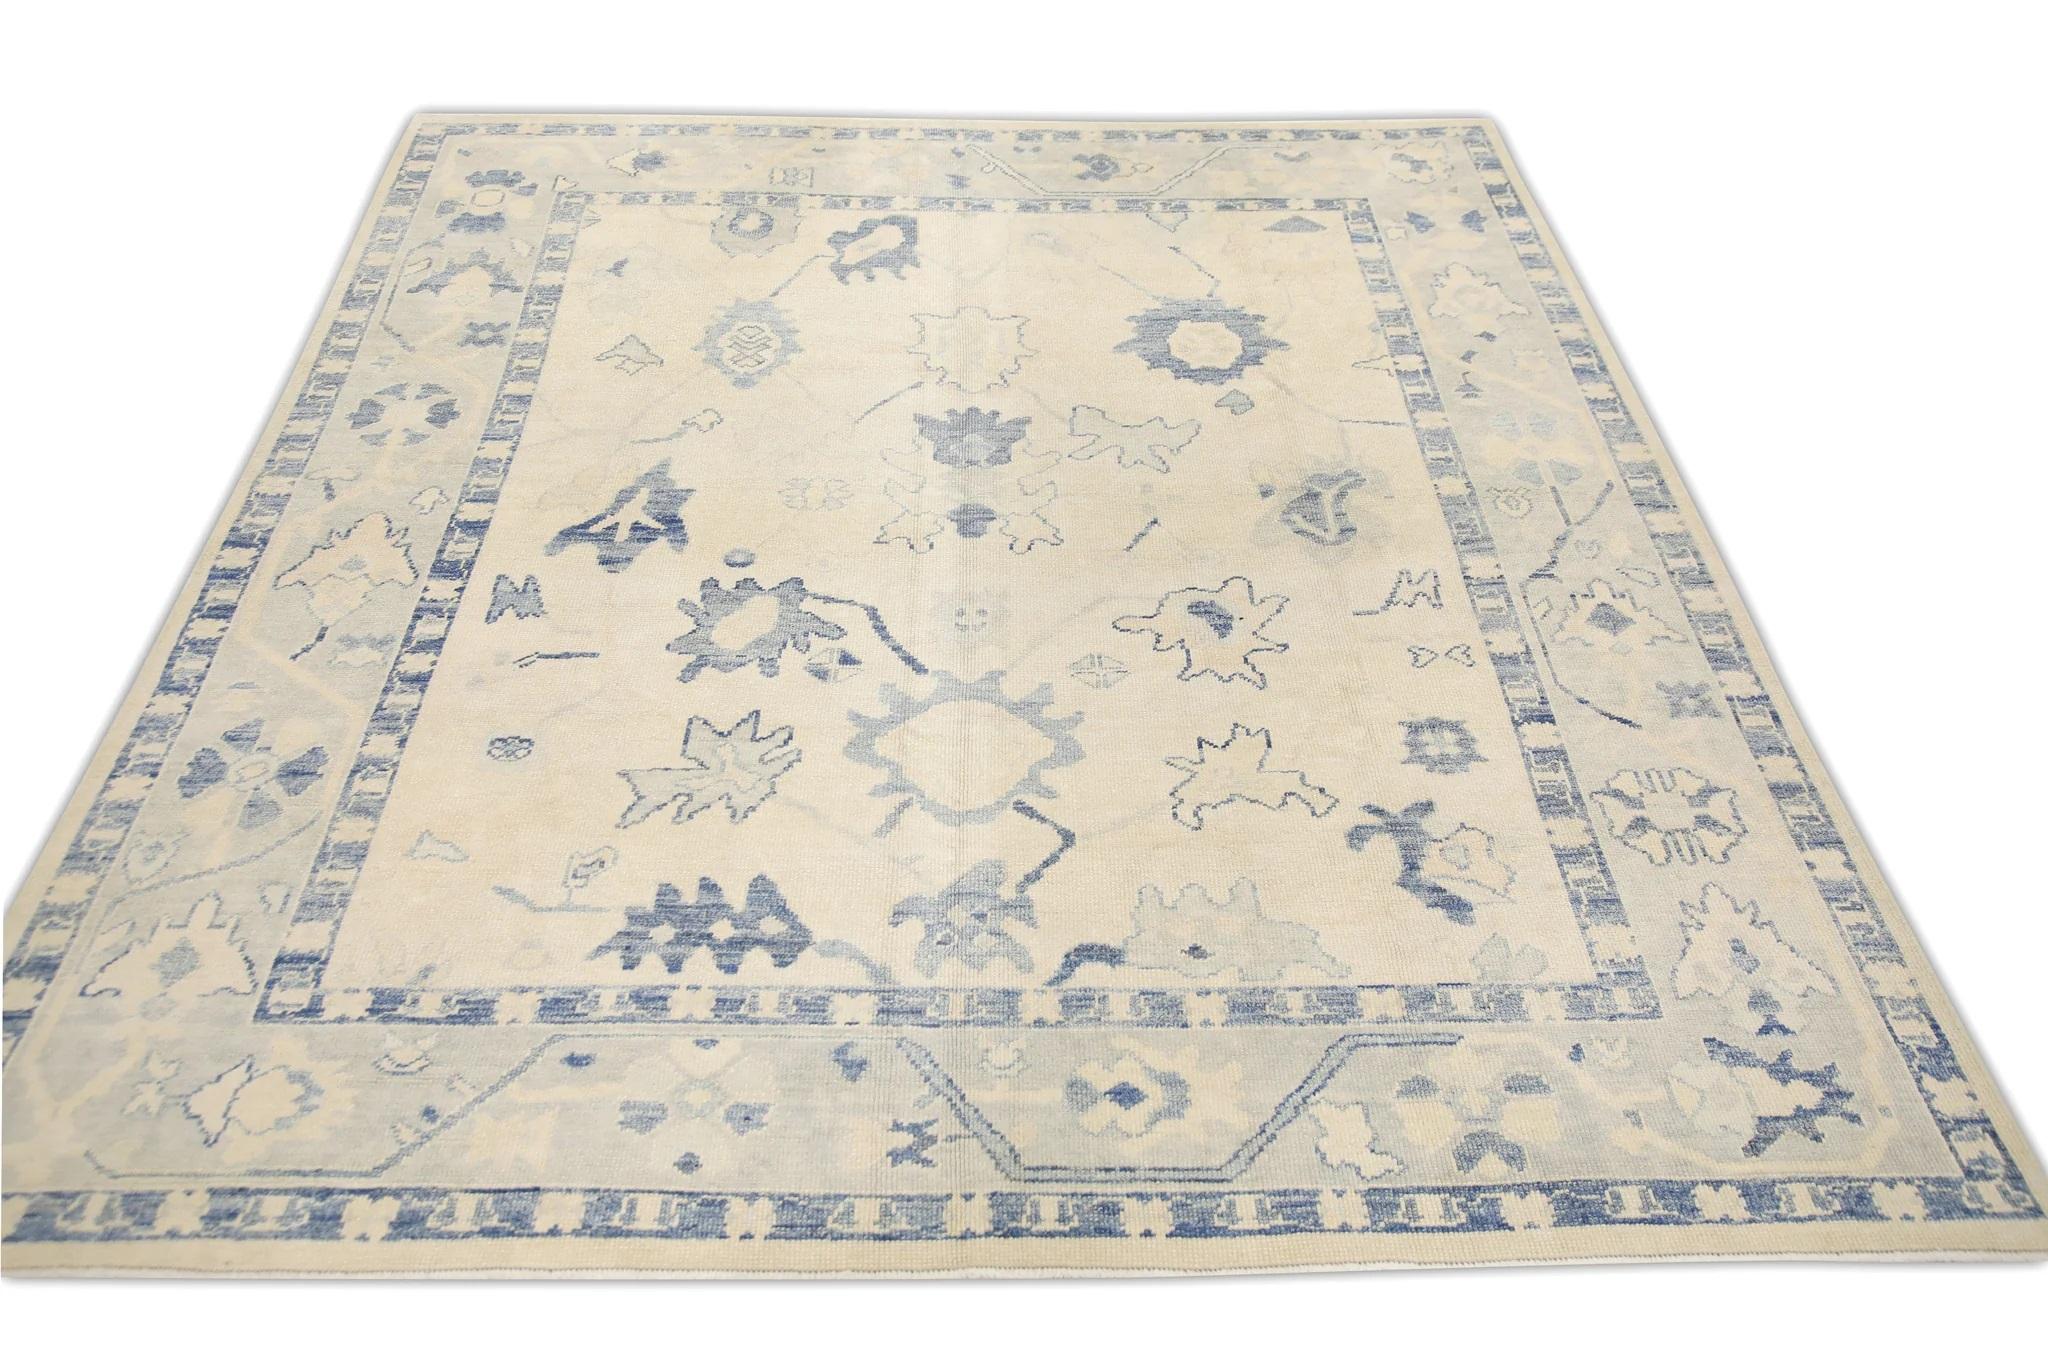 Contemporary Cream Handwoven Wool Turkish Oushak Rug in Blue Floral Design 8' x 9'5